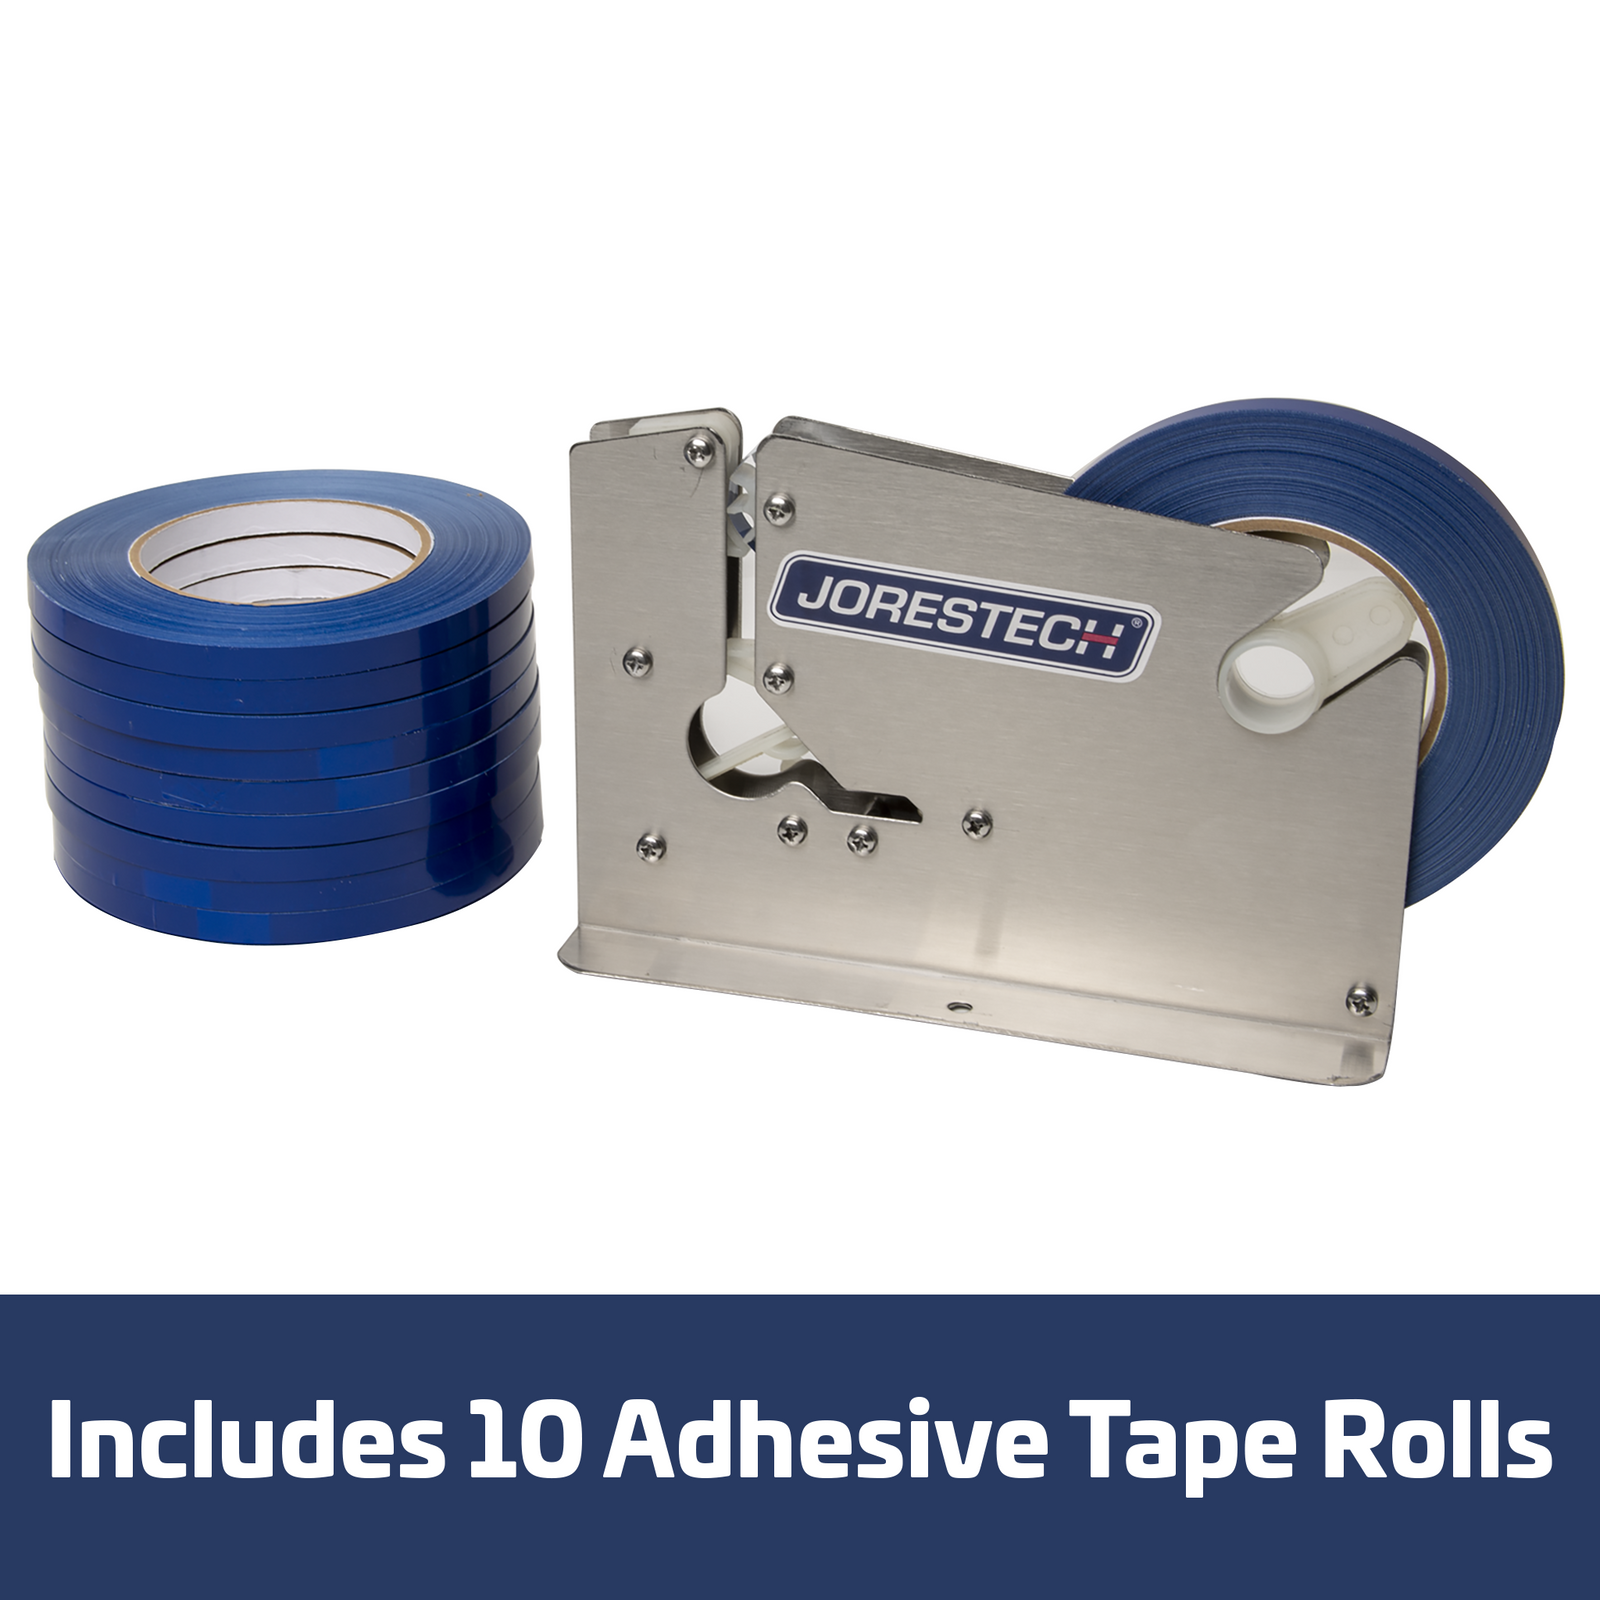 A stainless steel bag closer next to 10 blue tape rolls. Blue Banner reads: Includes 10 adhesive tape rolls.